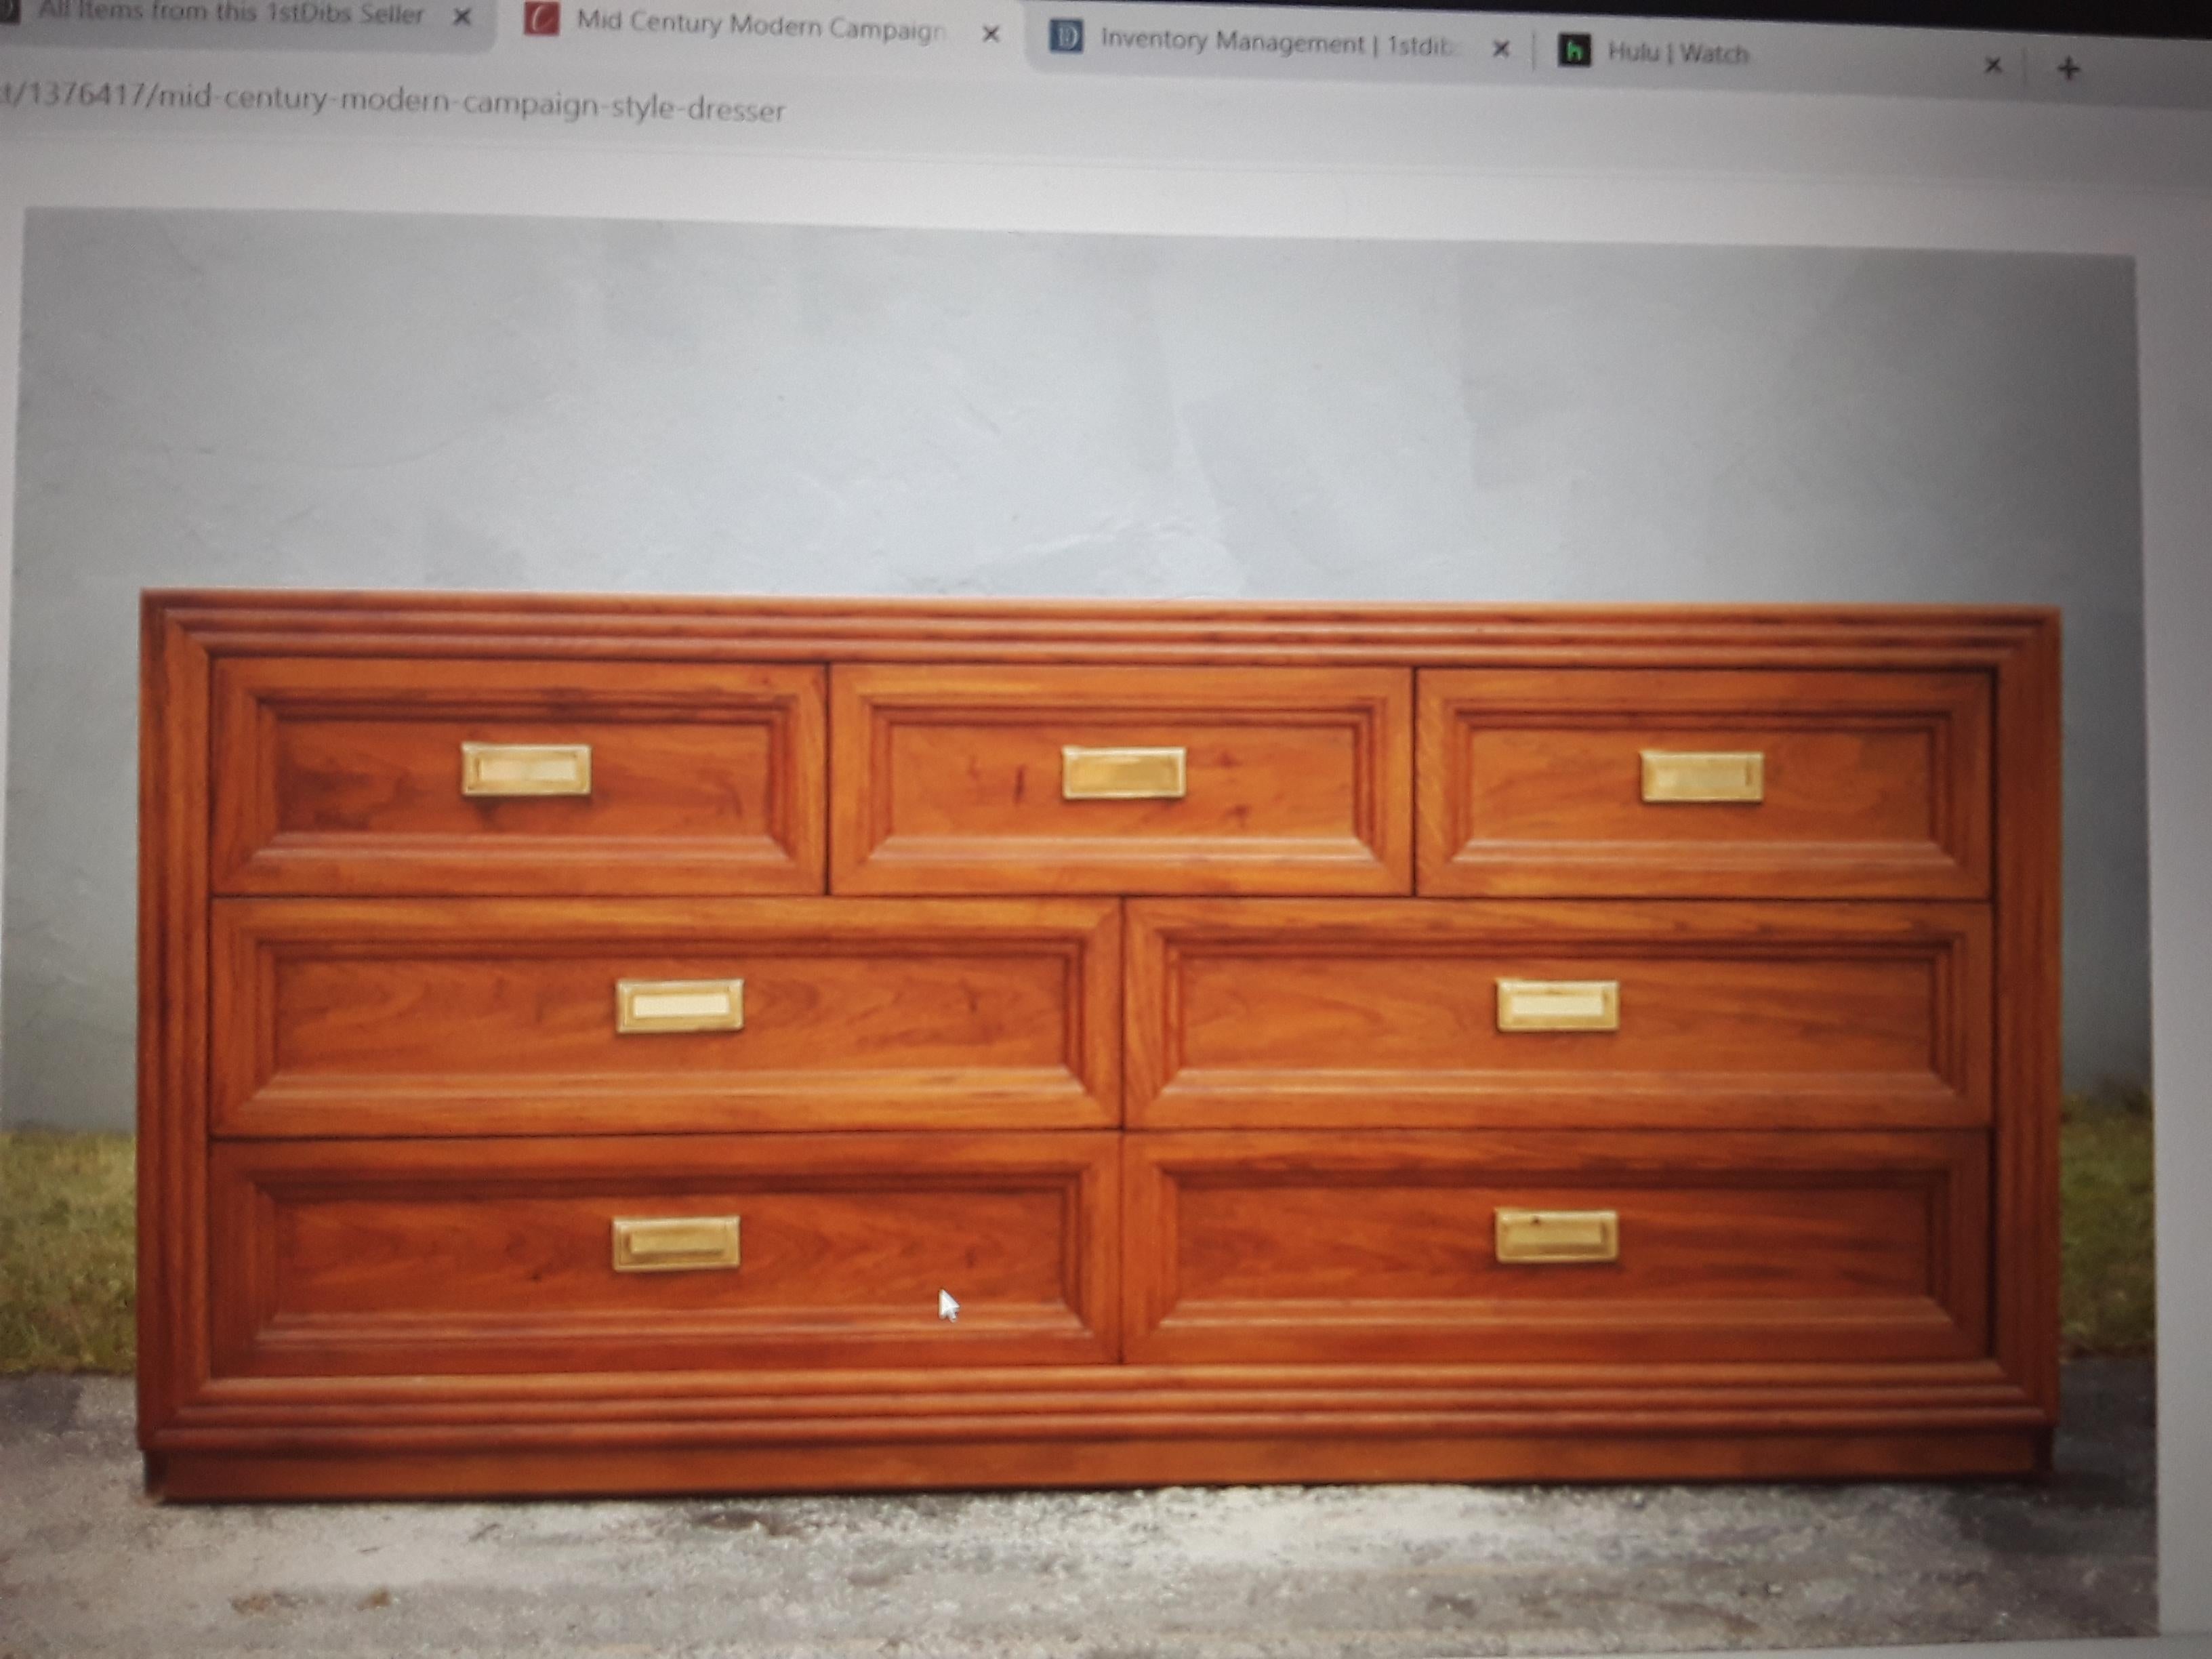 1970's Mid Century Modern Campaign style Dresser by Thomasville For Sale 2